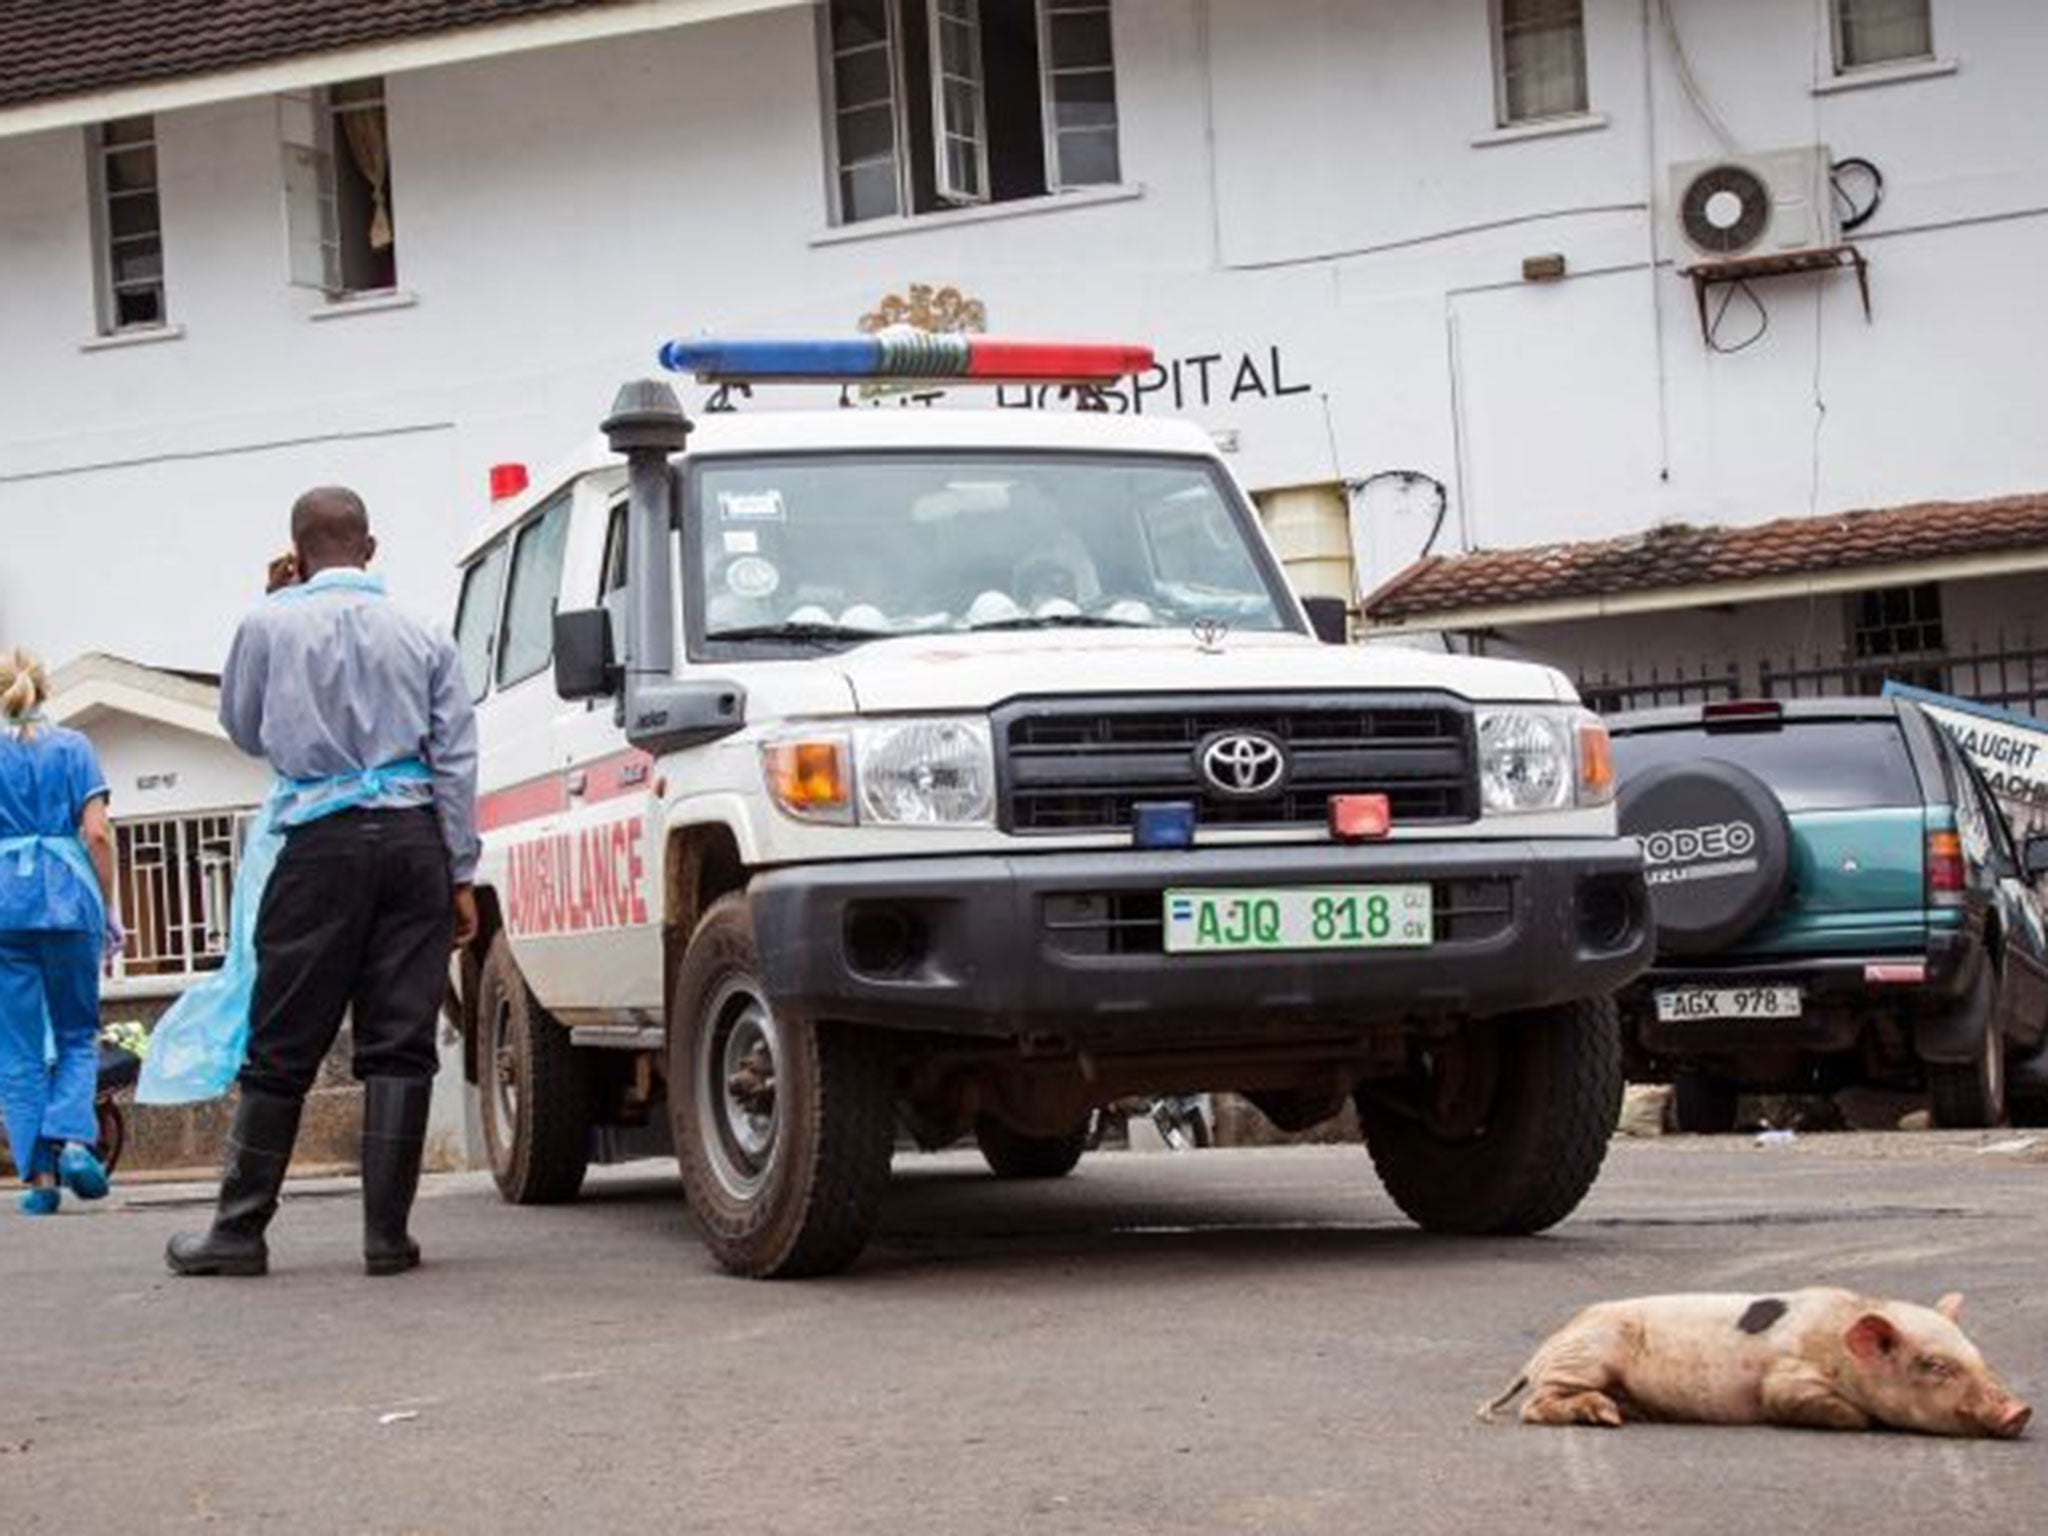 Connaught Hospital in Freetown during a three-day lockdown to prevent the spread on the Ebola virus